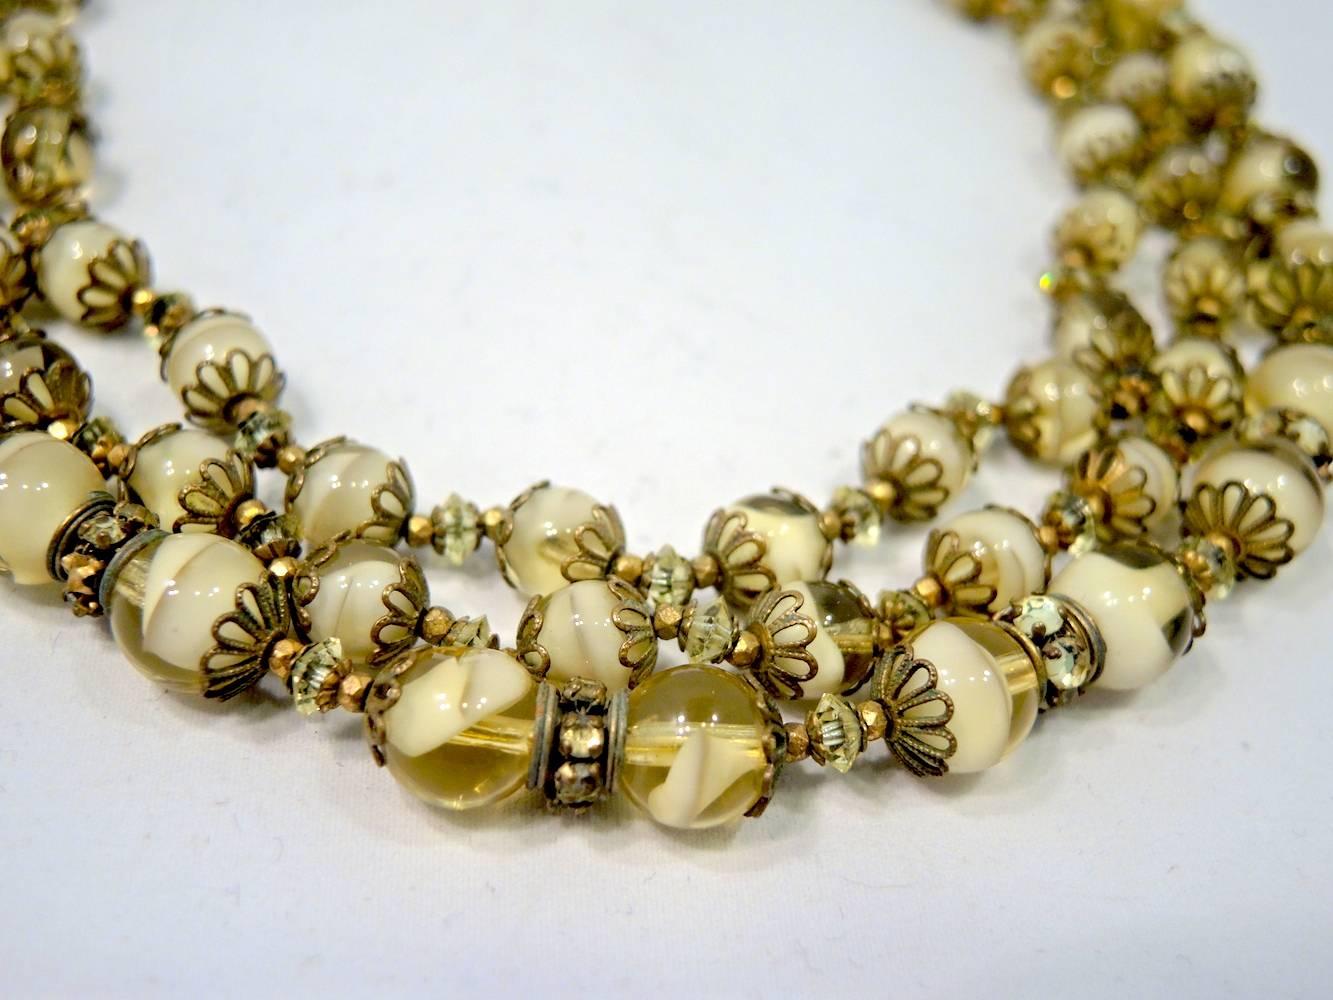 This vintage signed Miriam Haskell 3-strand necklace features light yellow and cream color glass beads with crystal spacers in a gold-tone setting.  This necklace measures 16” x 1” with a slide in clasp.  It is signed “Miriam Haskell” and is in